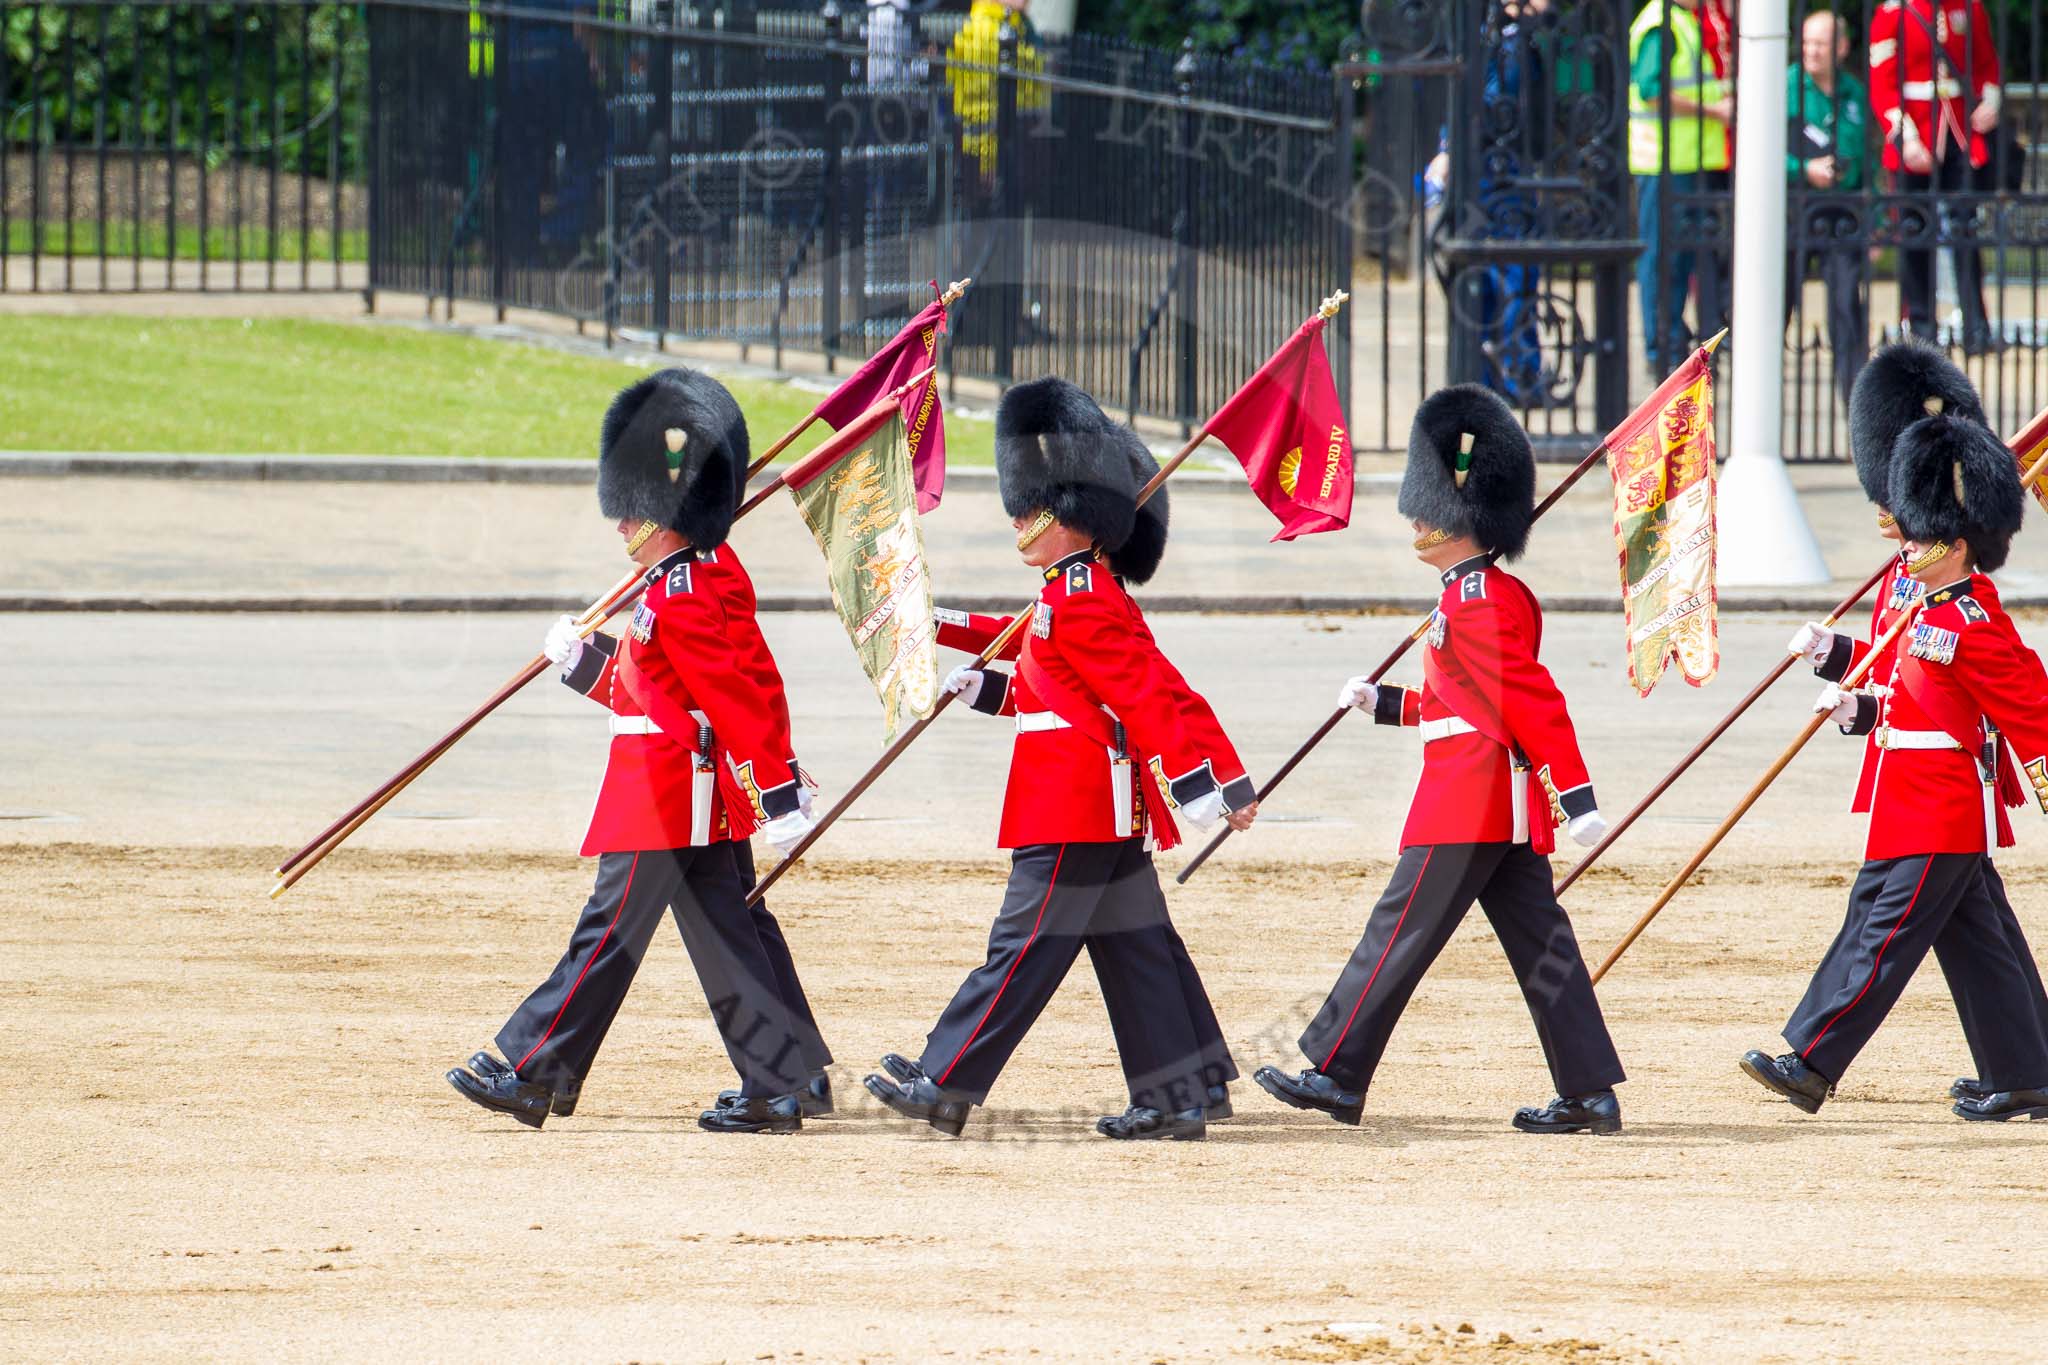 Major General's Review 2013: After the parade - the Keepers of the Ground, the first to arrive at Horse Guards Parade, are the last to leave..
Horse Guards Parade, Westminster,
London SW1,

United Kingdom,
on 01 June 2013 at 12:13, image #740